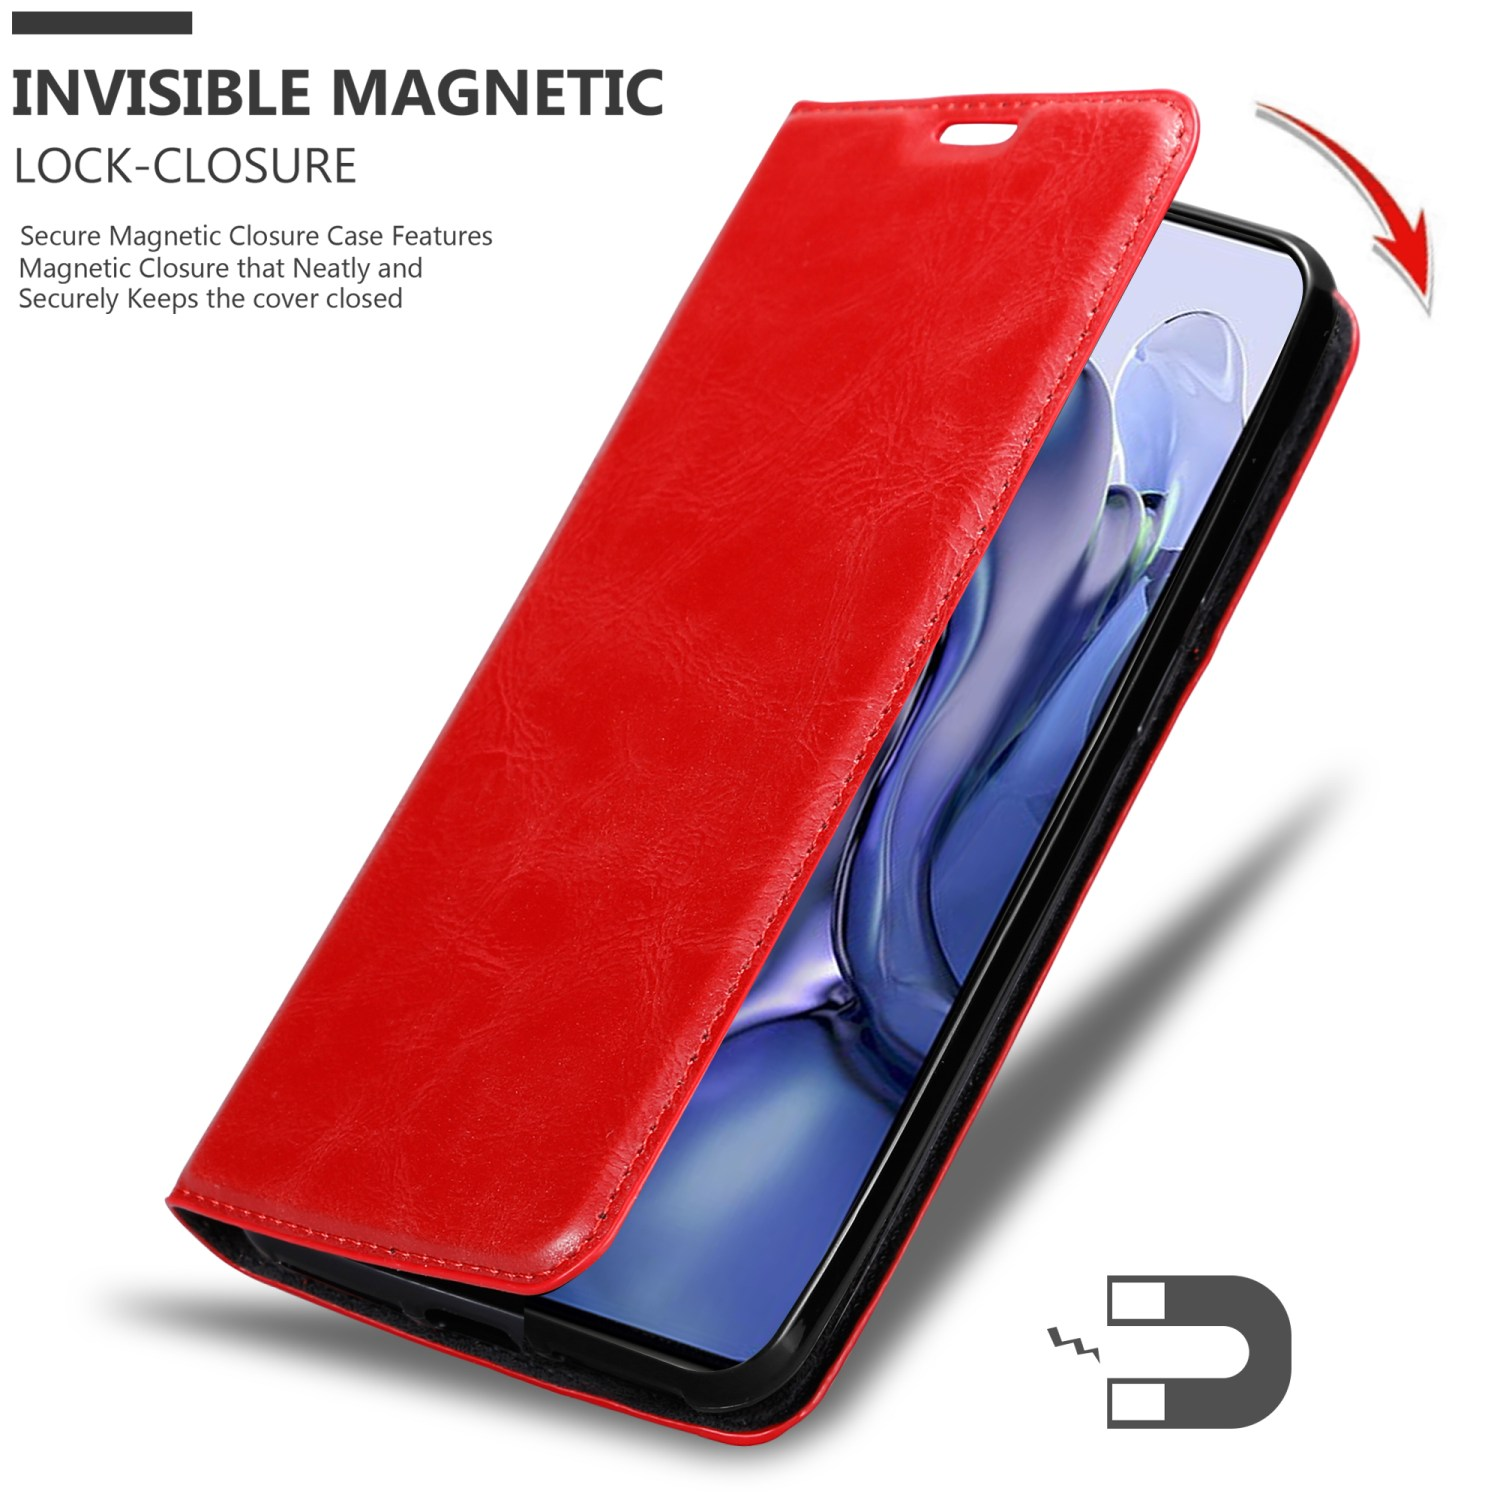 / Bookcover, Book APFEL Magnet, 11T PRO, CADORABO Hülle Invisible 11T Xiaomi, ROT